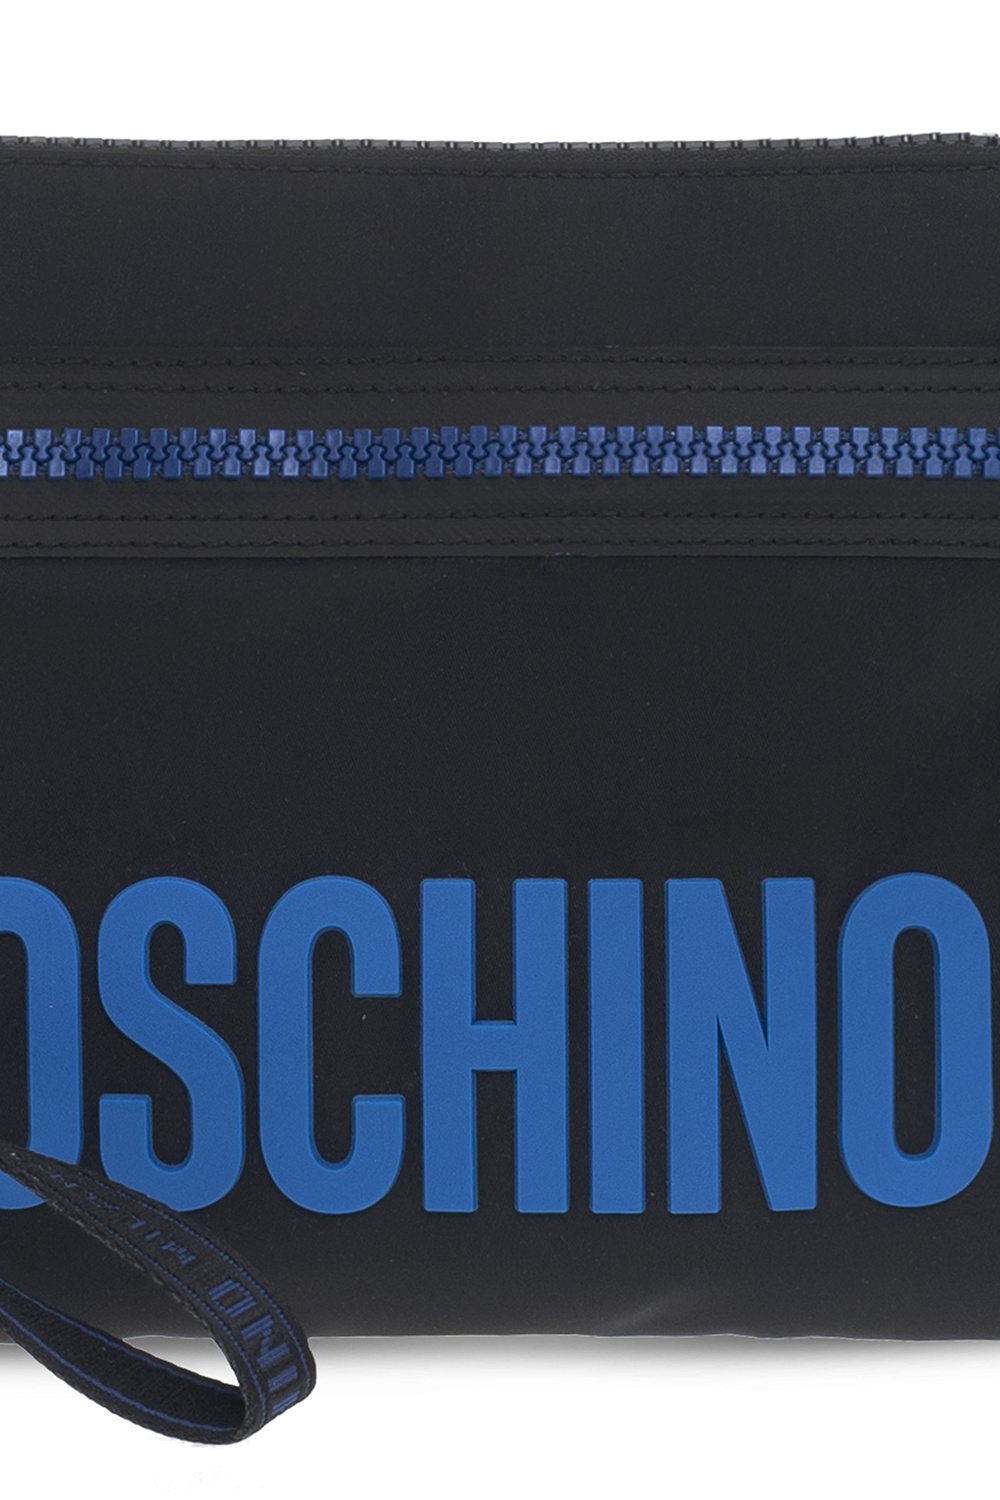 Moschino Courr ges Satchels & Cross Body Bags